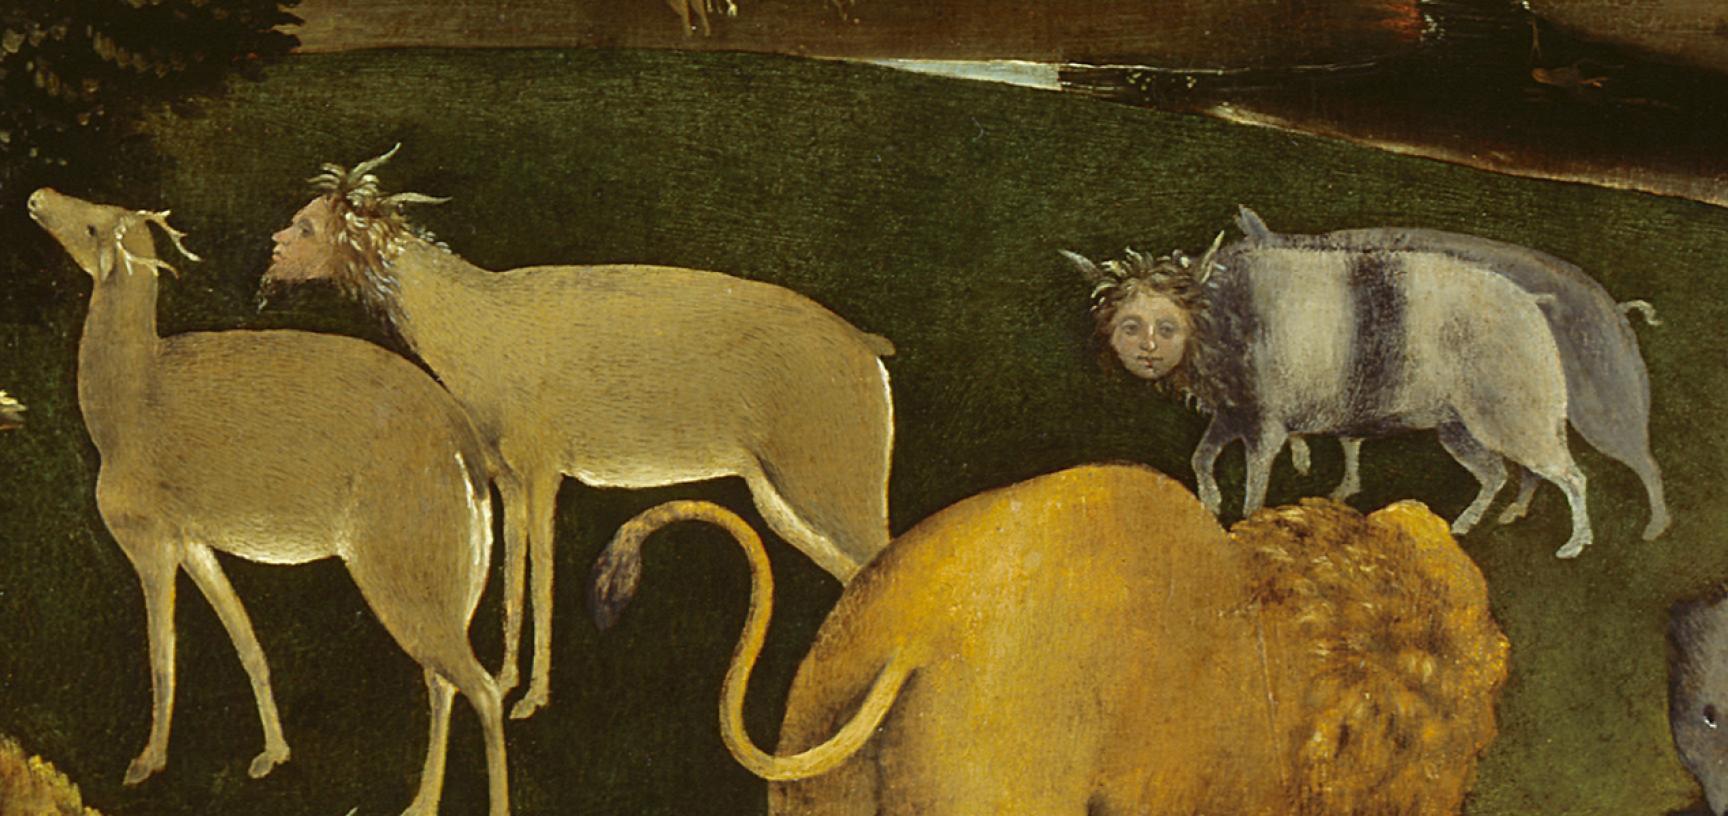 The Forest Fire (detail) by Piero di Cosimo